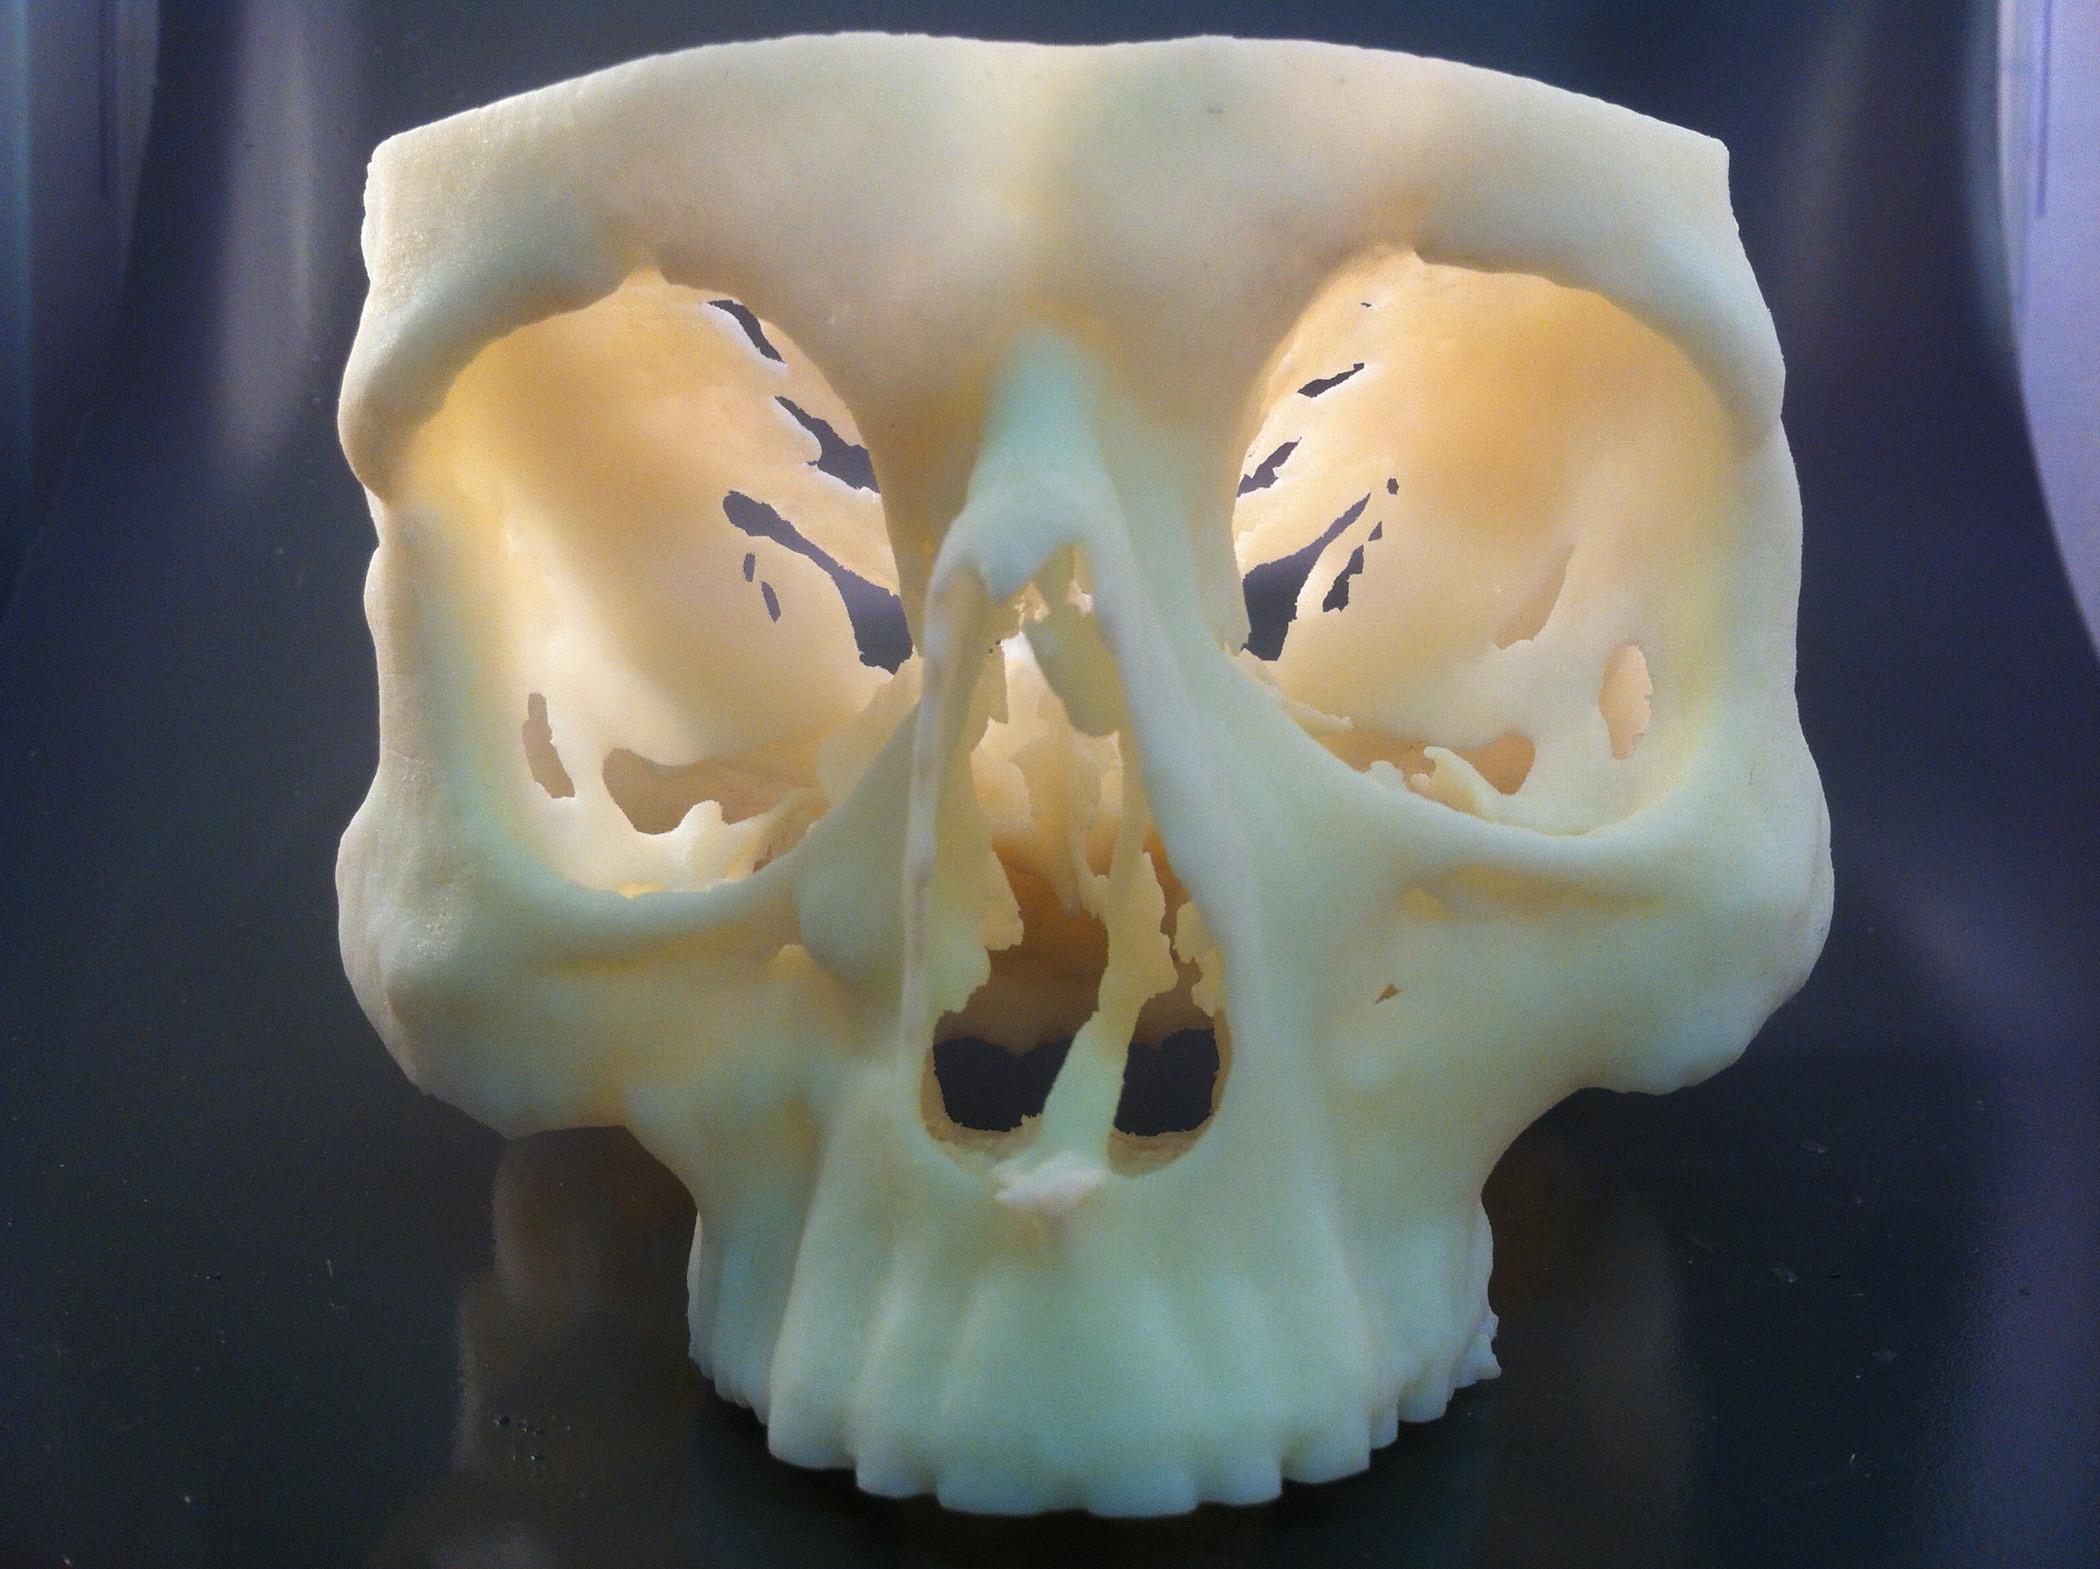 Cranium produced on a Stratasys Objet30 Pro 3D Printer, used to validate patient surgery prior to the operation